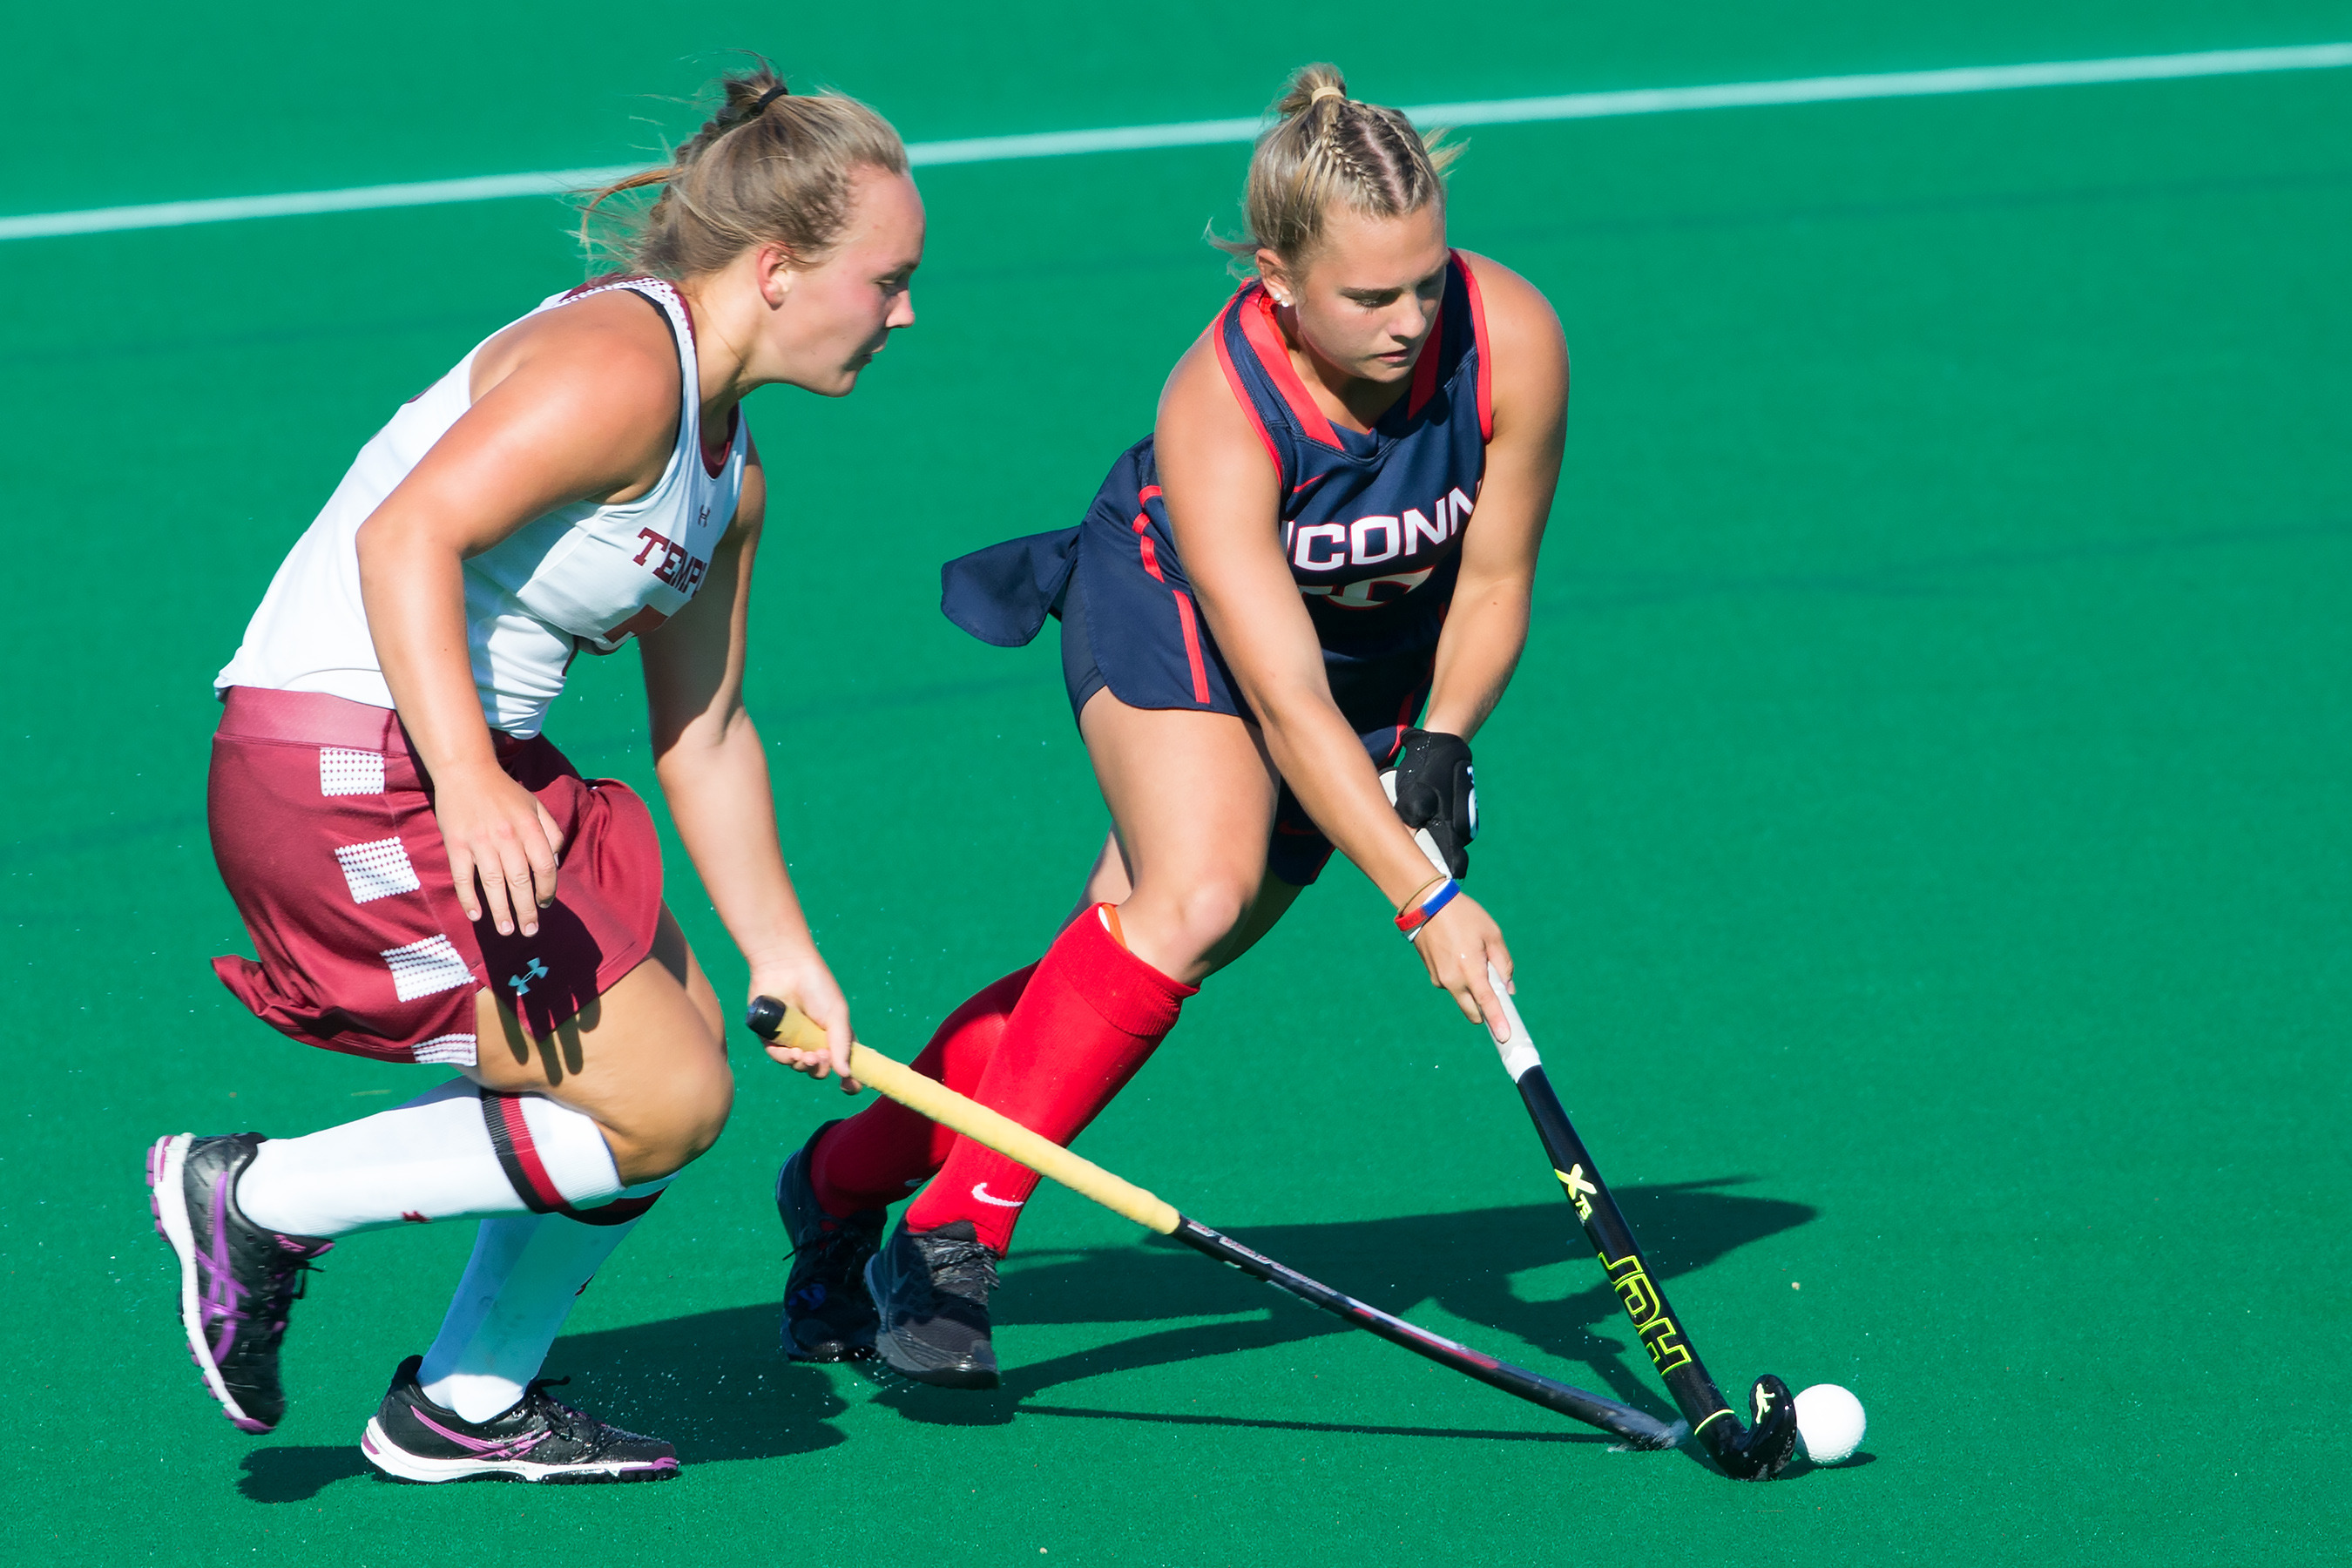 Amanda Collins '18, a standout on the UConn field hockey team, has been selected for the U-21 U.S. Women's National Team. (Stephen Slade '89 (SFA) for UConn)